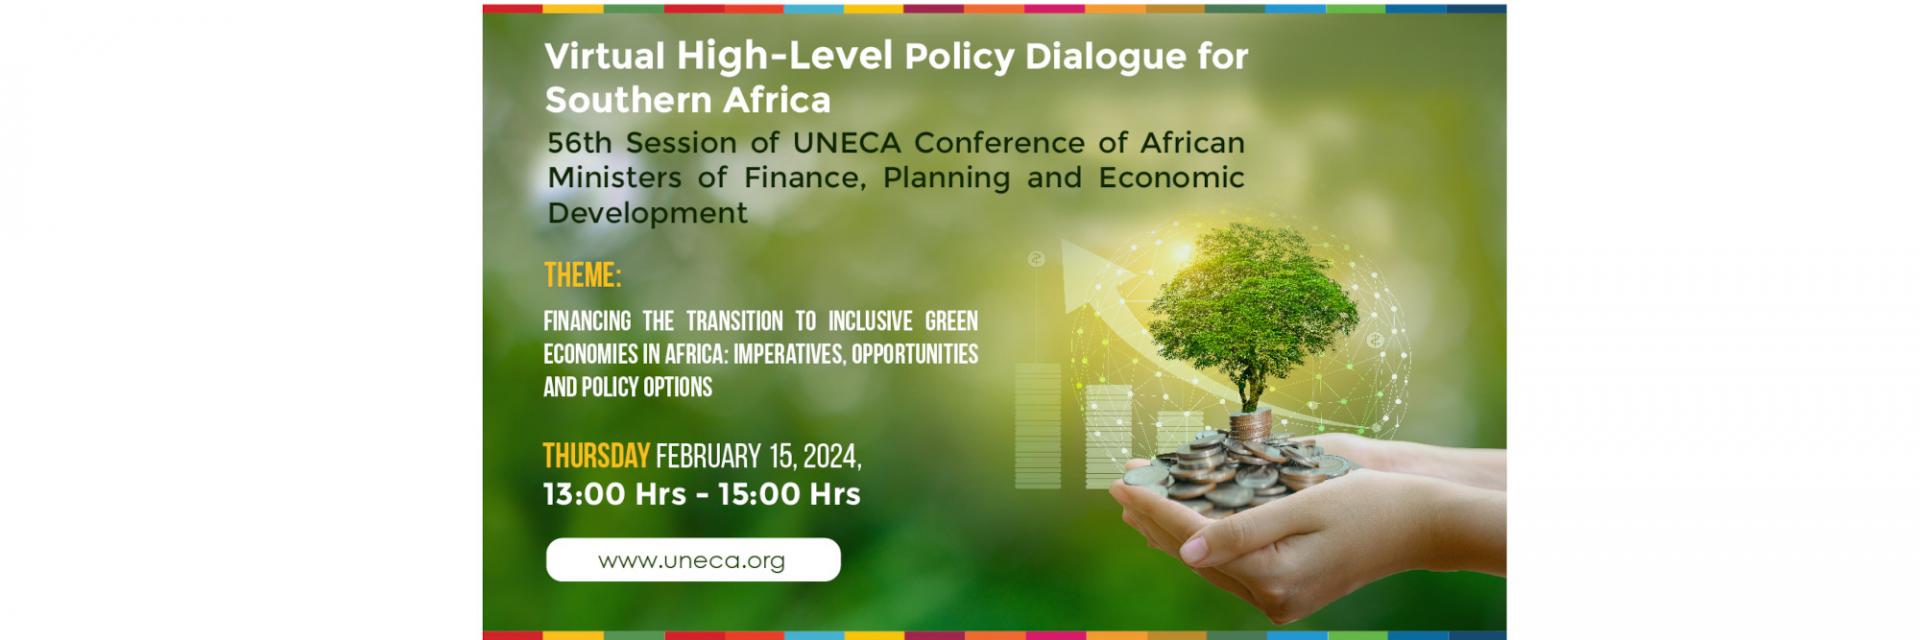 Southern Africa needs mindset change and homegrown solutions to achieve transition to inclusive green economies